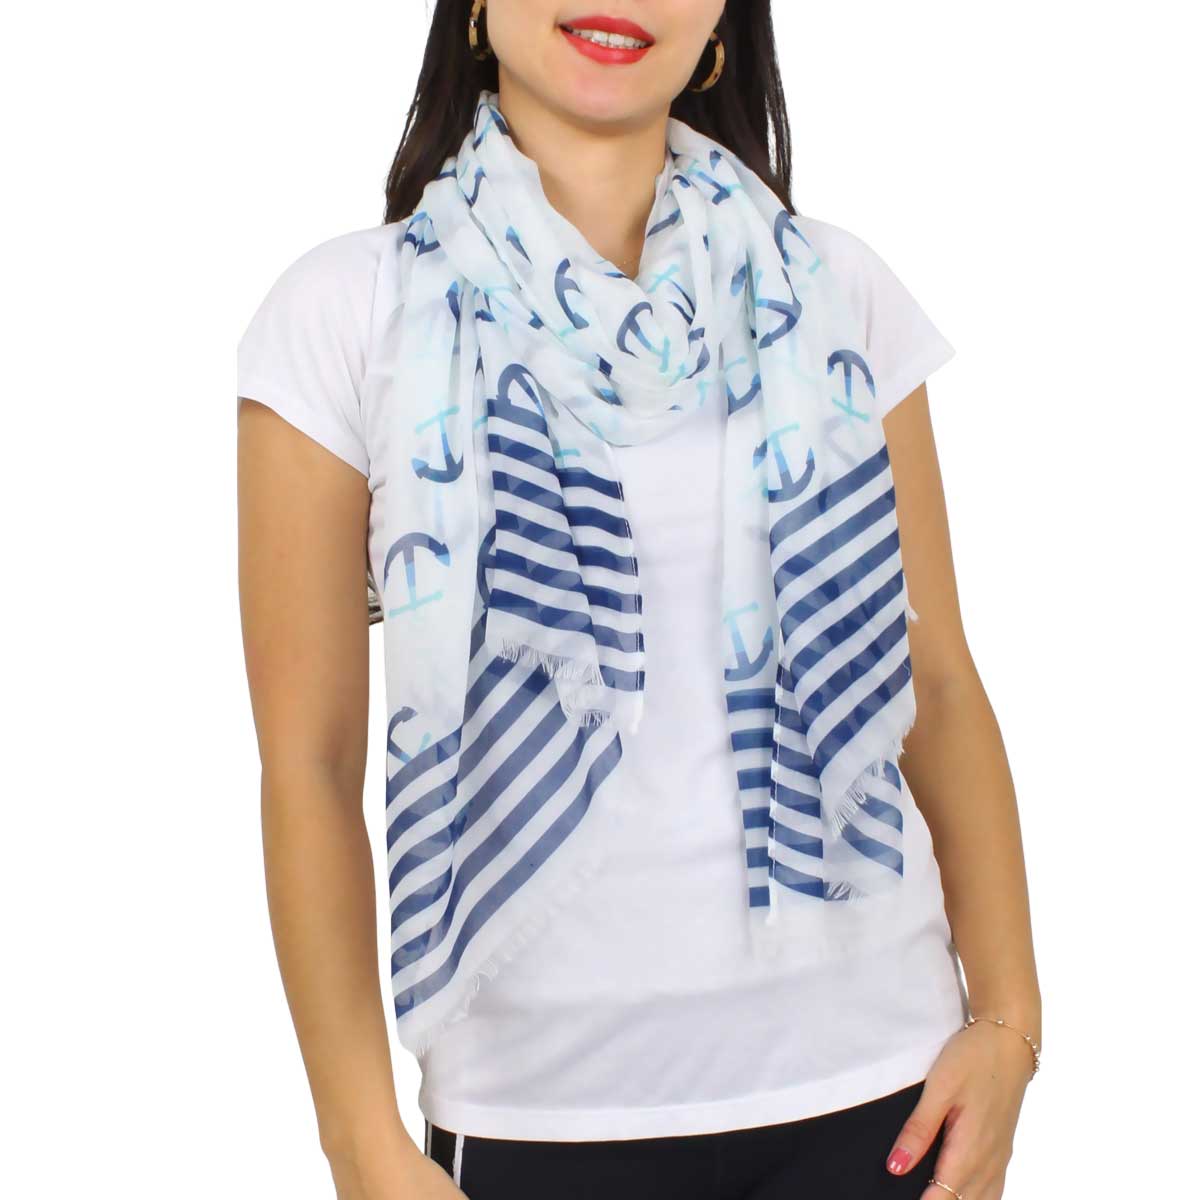 3111 - Nautical Print Scarves Oblong and Infinity 8079 - Beige<br>
Anchor Design Nautical Print Scarf/Shawl - 